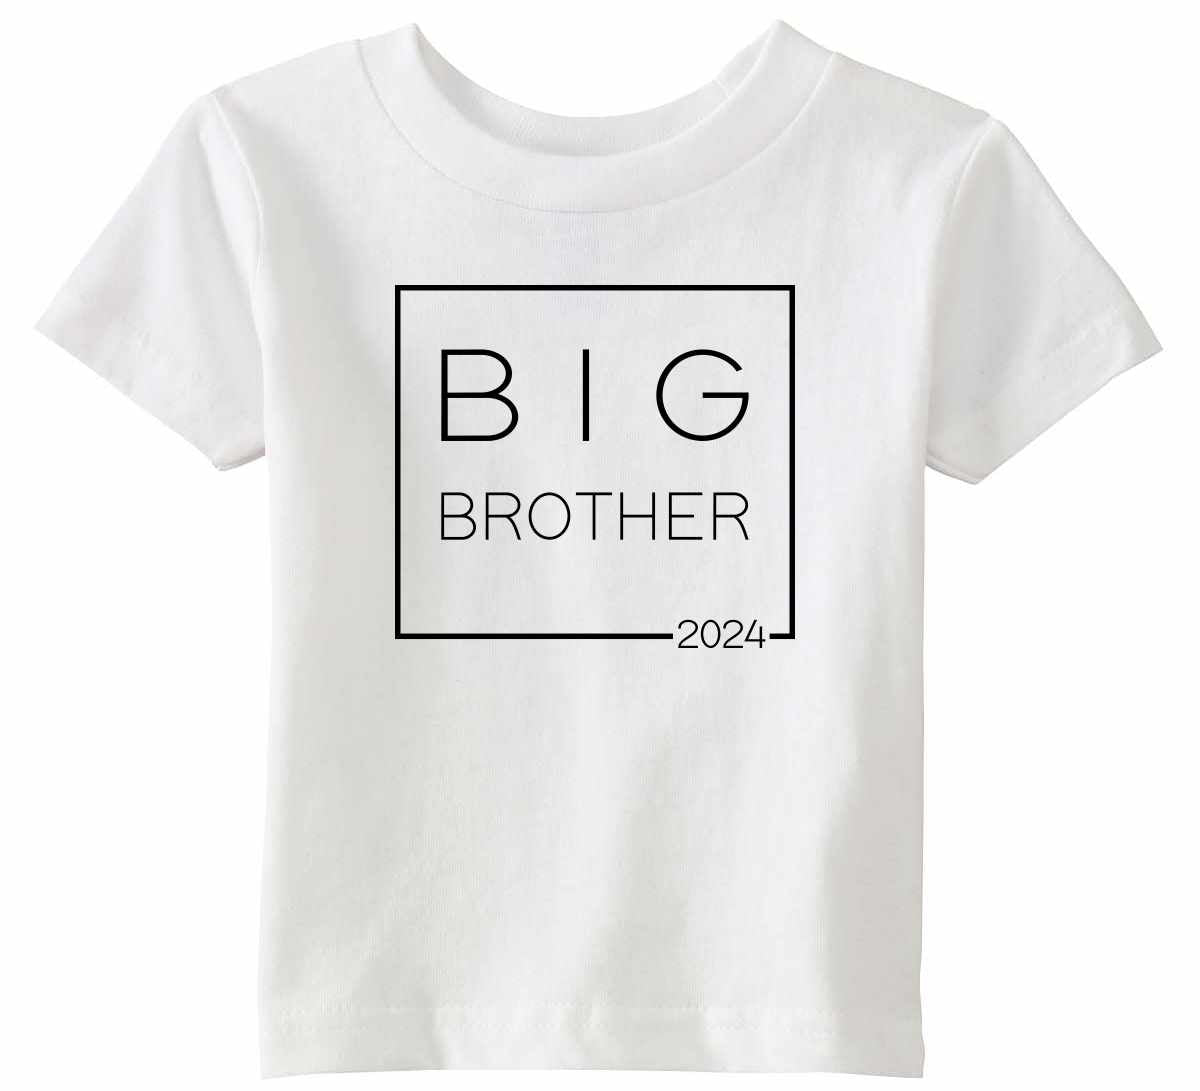 Big Brother Box 2024 on Infant-Toddler T-Shirt